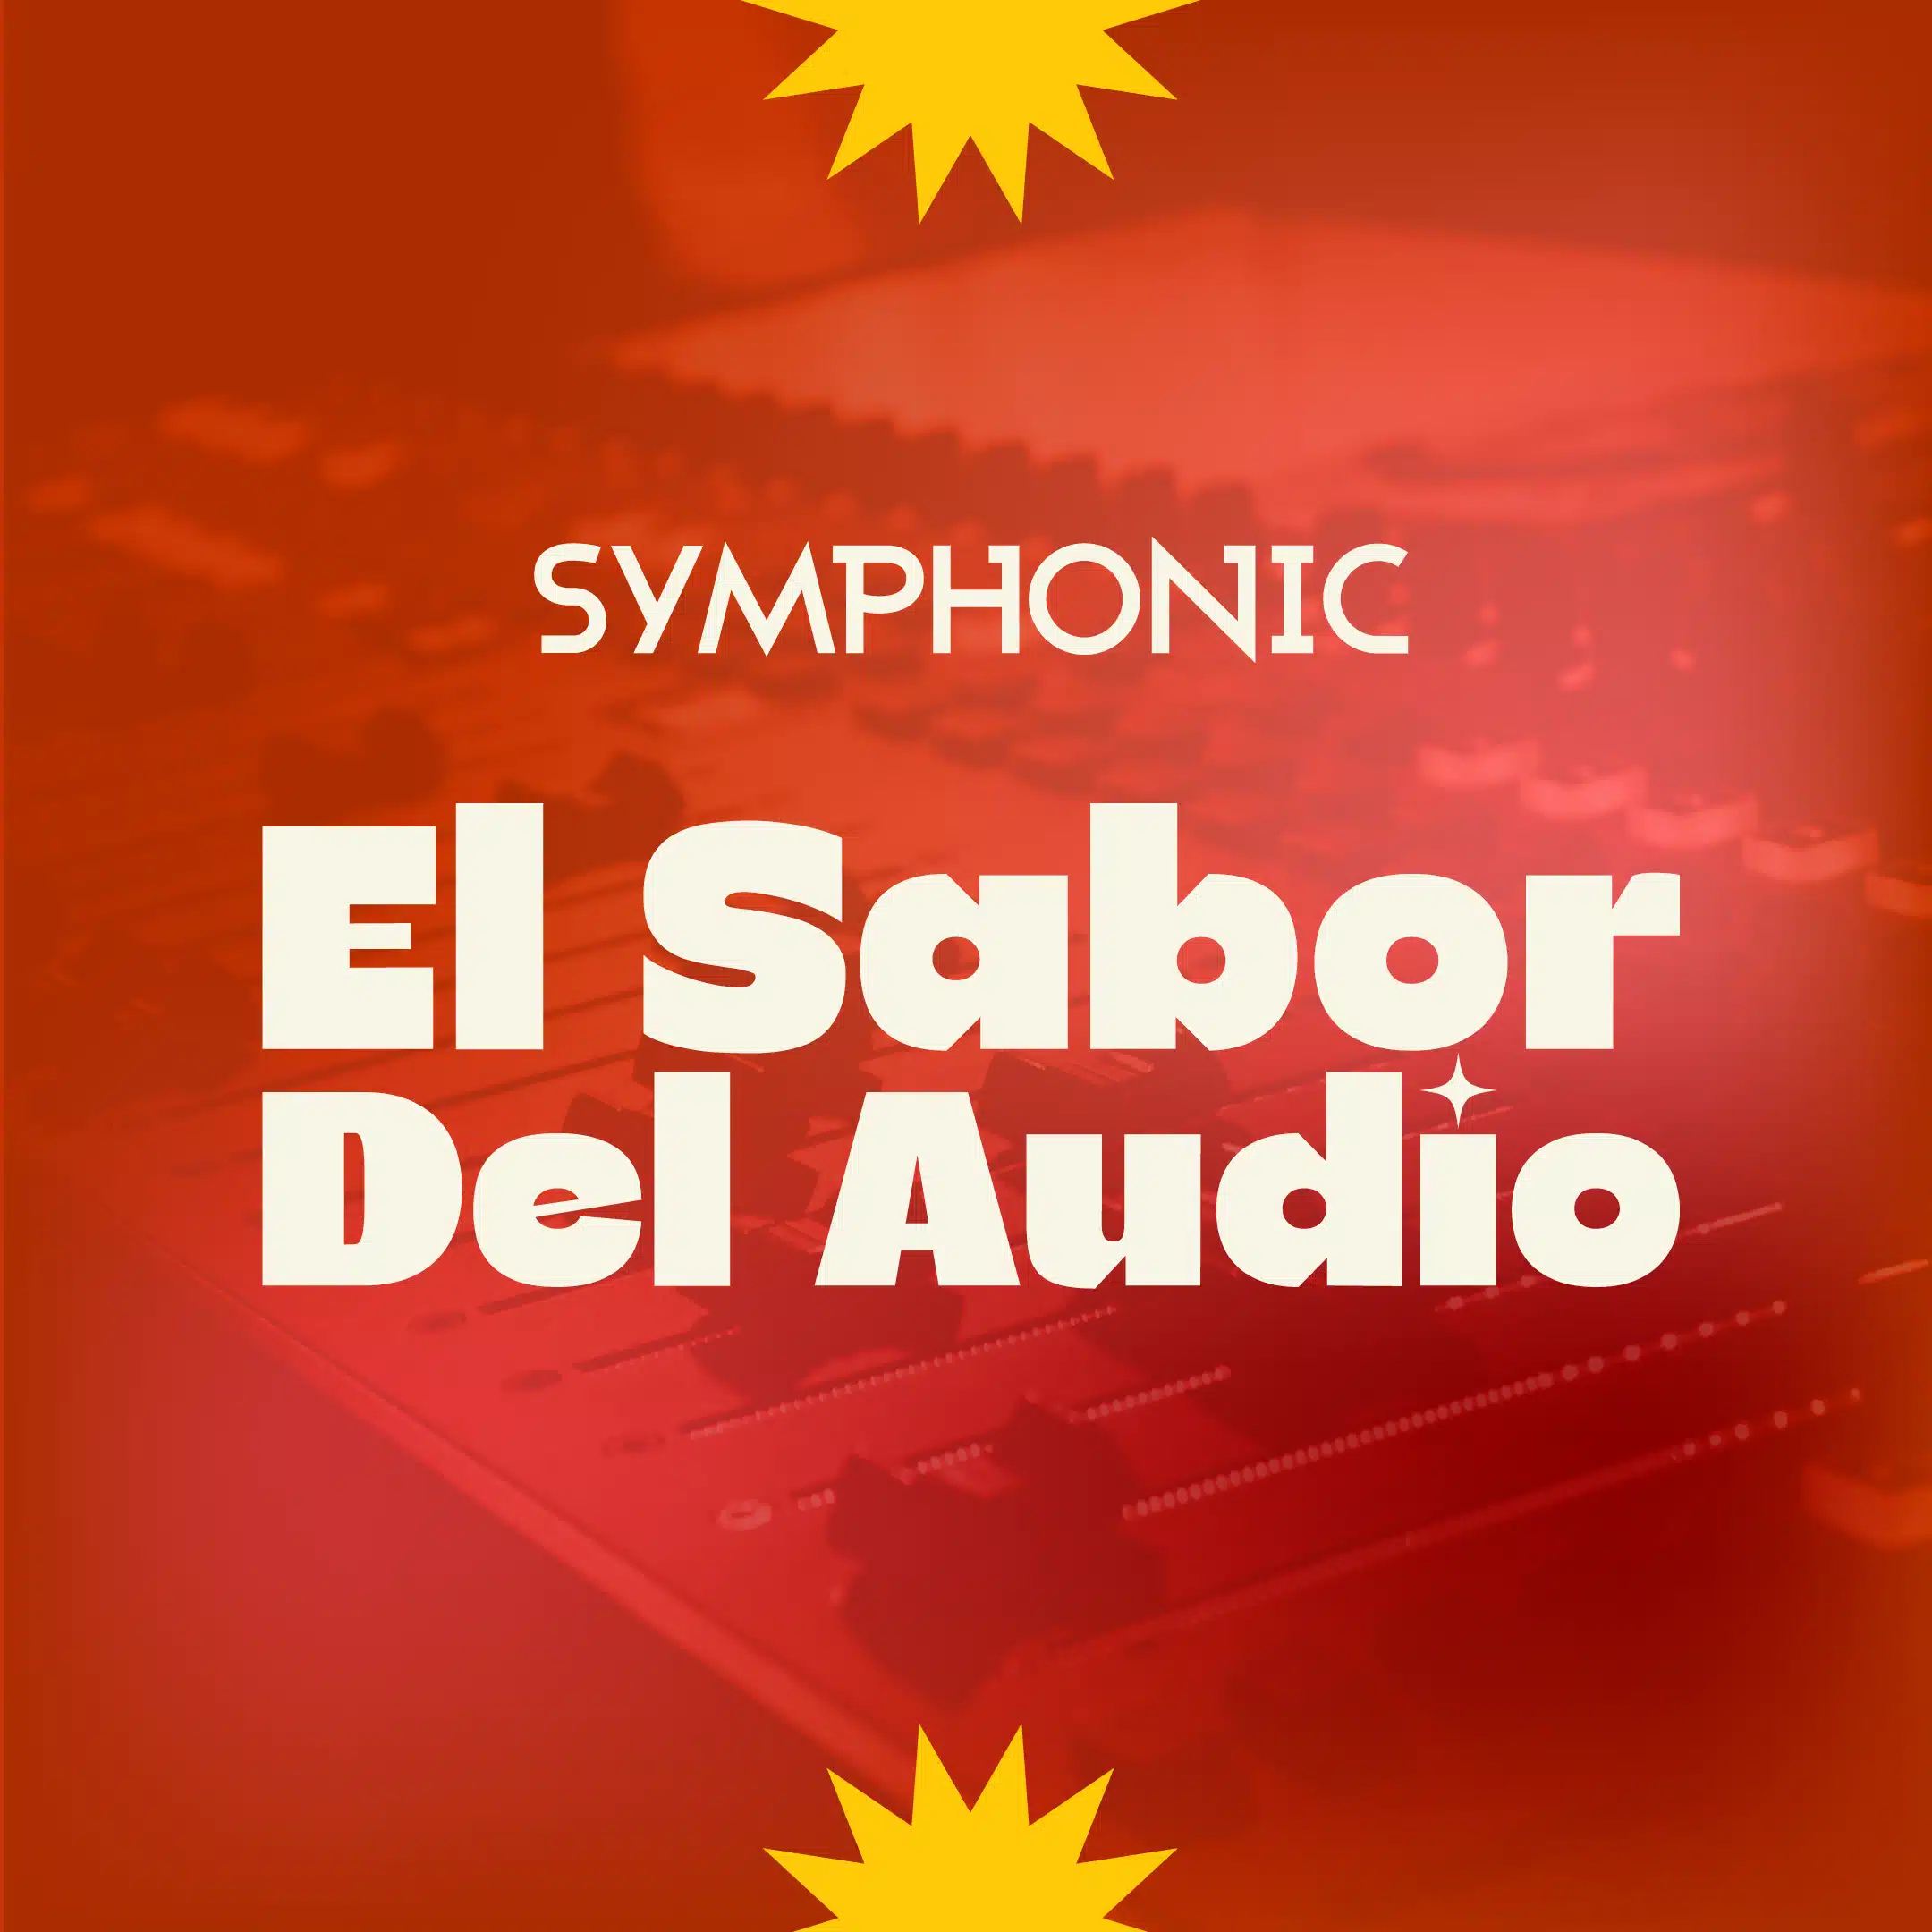 Audio mixing console with text overlay reading 'symphonic podcasts el sabor del audio'.